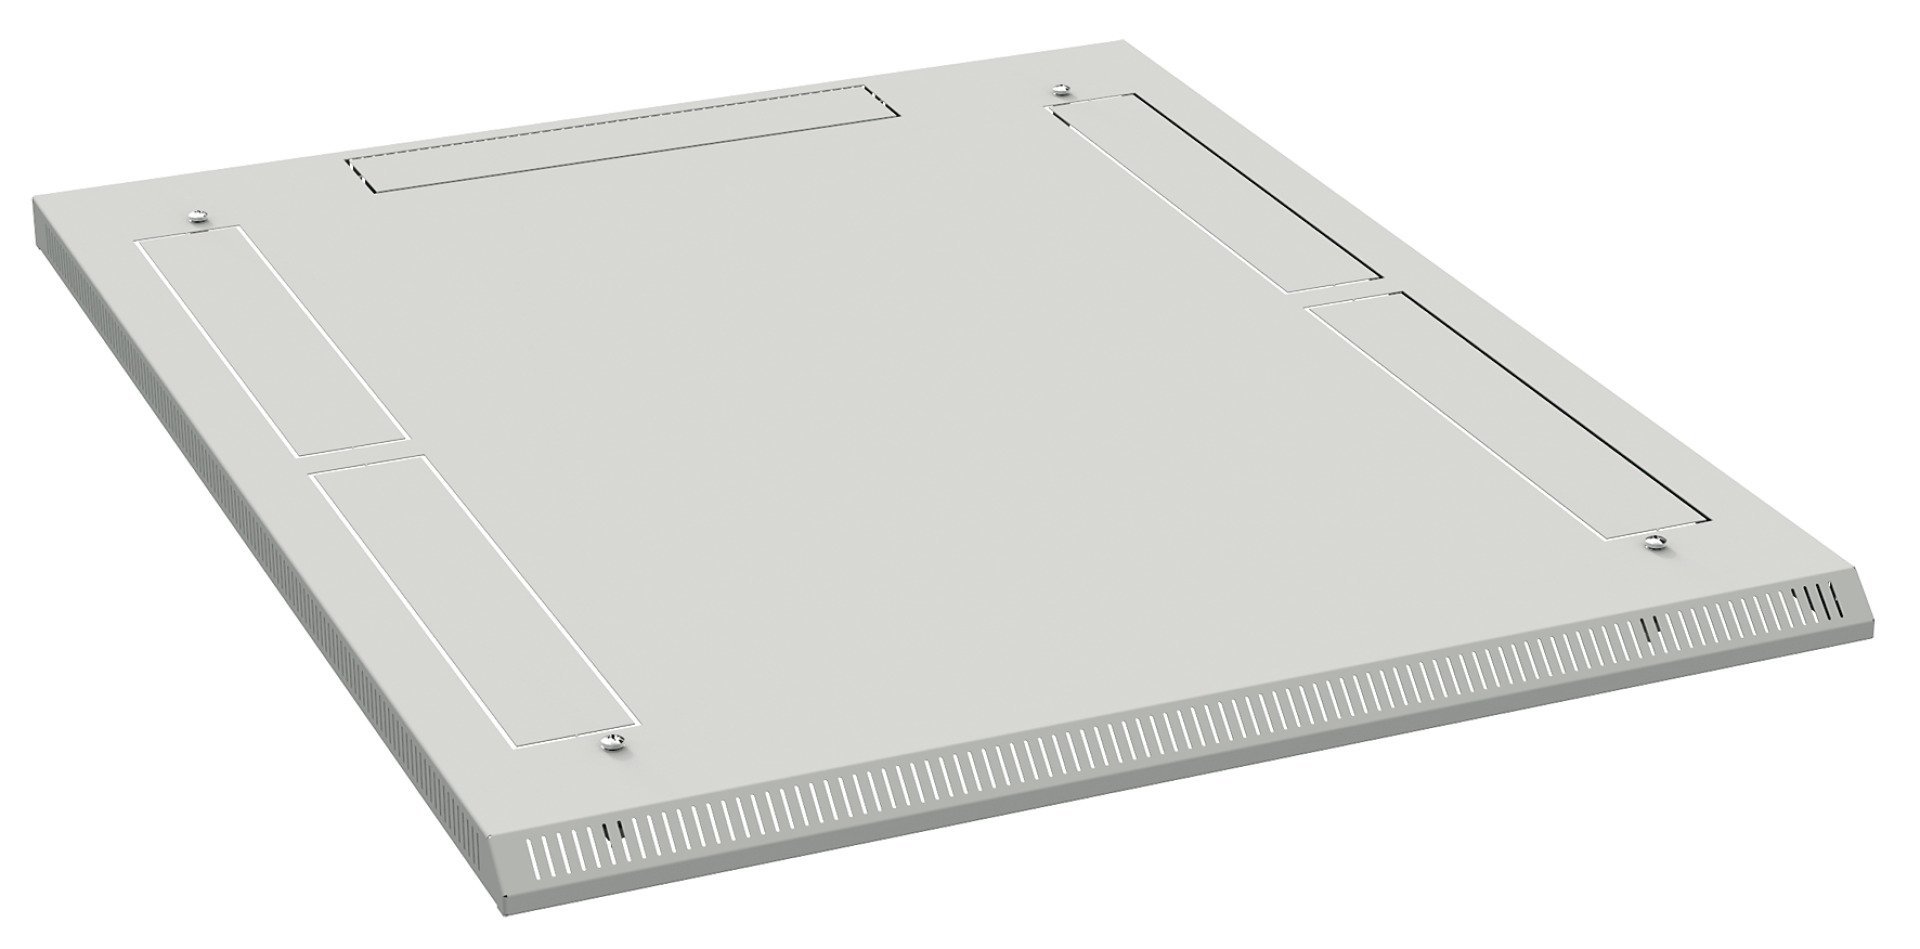 Additional Roof H=40 mm, 800x1200 mm, RAL7035, for Cabinet Series PRO